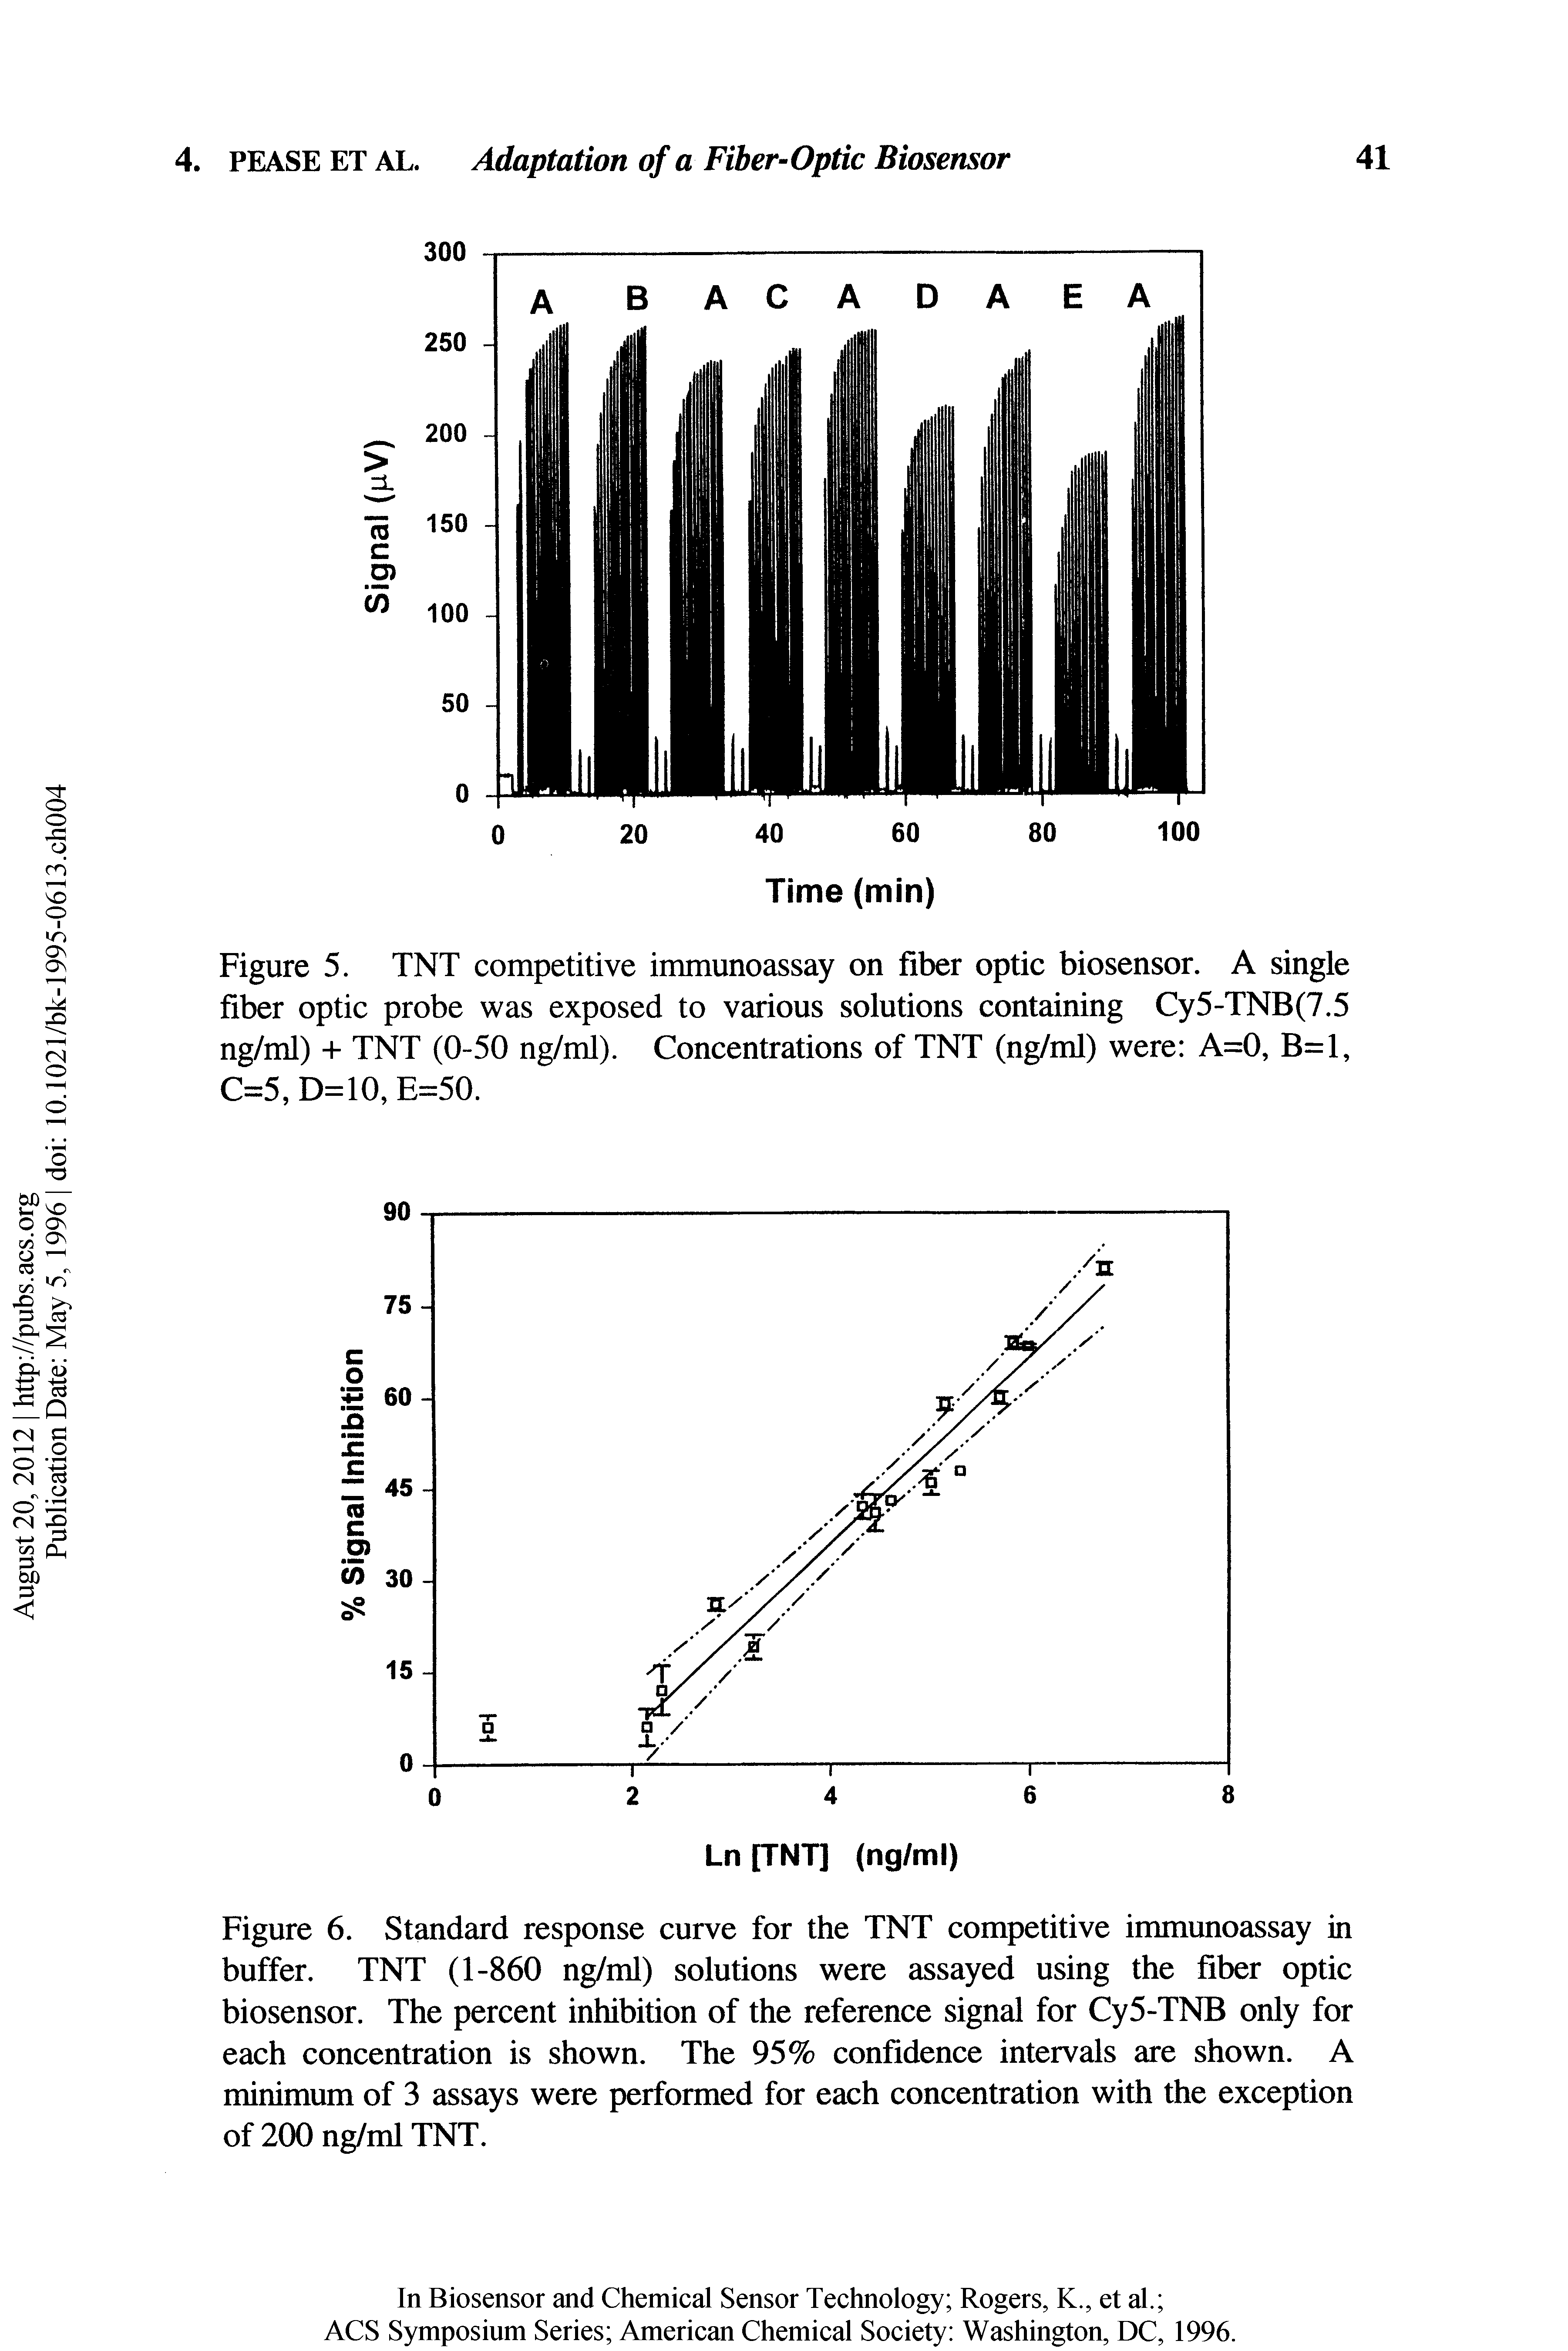 Figure 6. Standard response curve for the TNT competitive immunoassay in buffer. TNT (1-860 ng/ml) solutions were assayed using the fiber optic biosensor. The percent inhibition of the reference signal for Cy5-TNB only for each concentration is shown. The 95% confidence intervals are shown. A minimum of 3 assays were performed for each concentration with the exception of 200 ng/ml TNT.